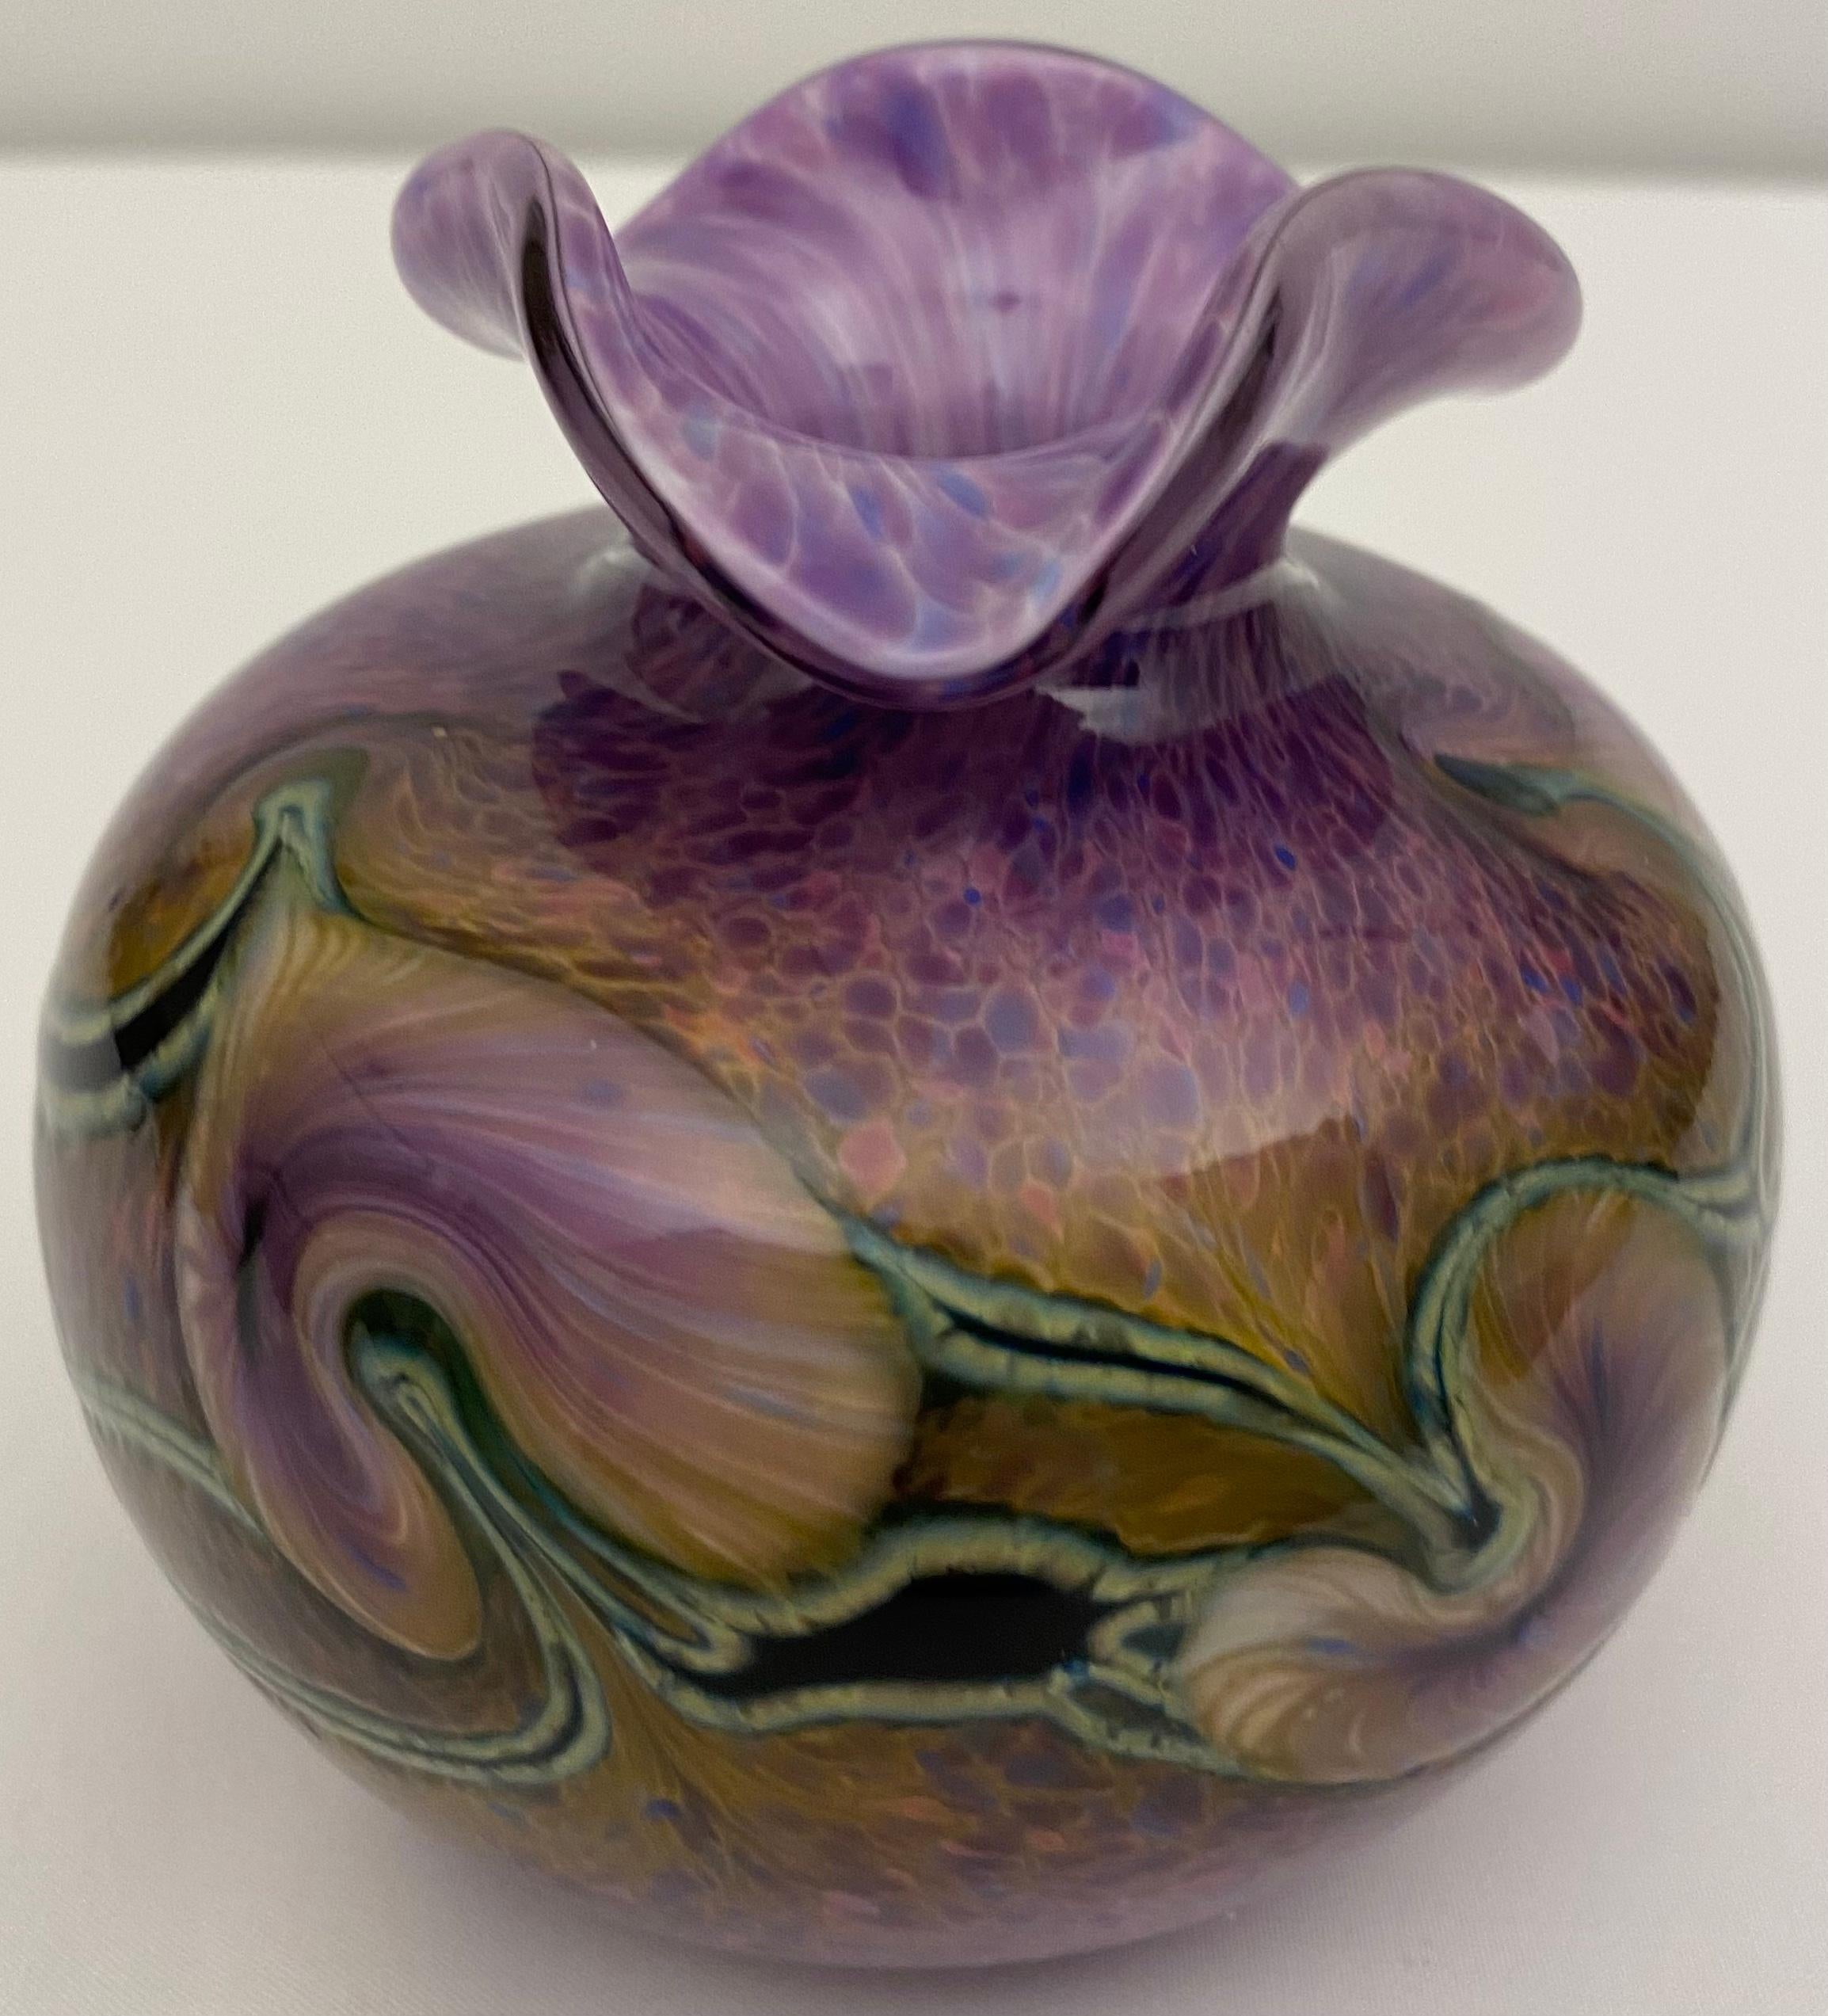 Beautiful round Murano art glass vase. At the top, the edges are scalloped protrude outward in a wavy fashion. The base is white with little shades of purple, blue and pink. The colors move from darker at the base to slightly lighter shades at the